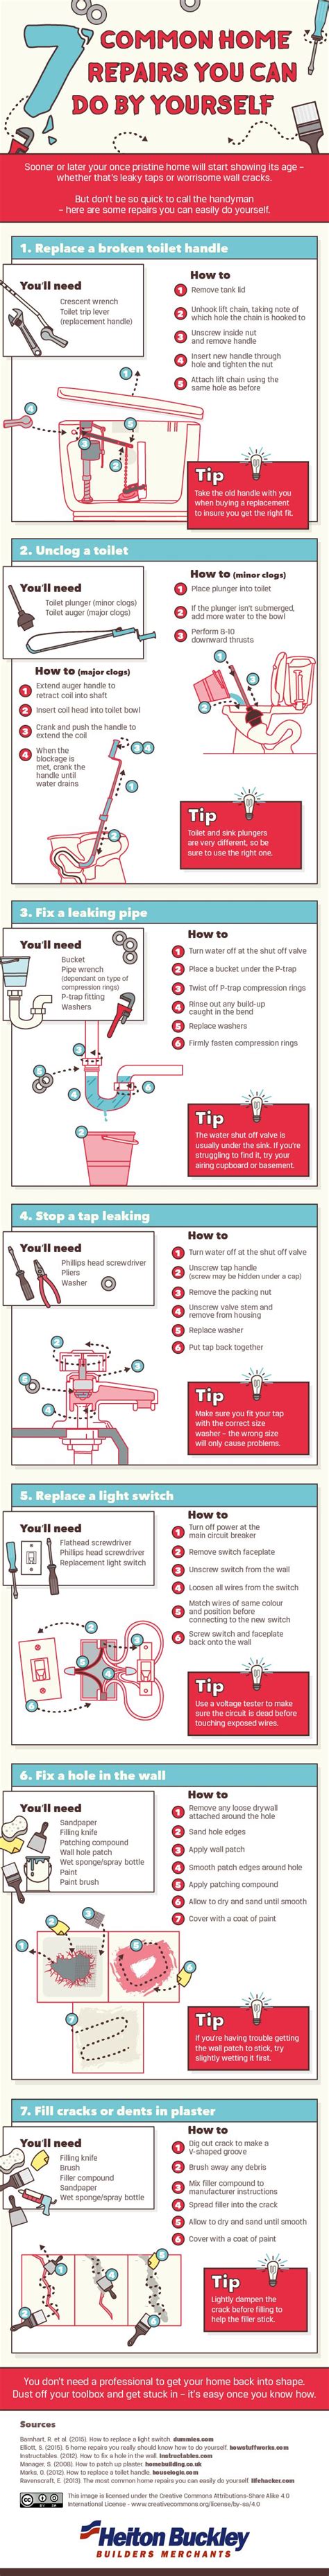 7 Common Home Repairs You Can Do By Yourself Infographic Visualistan